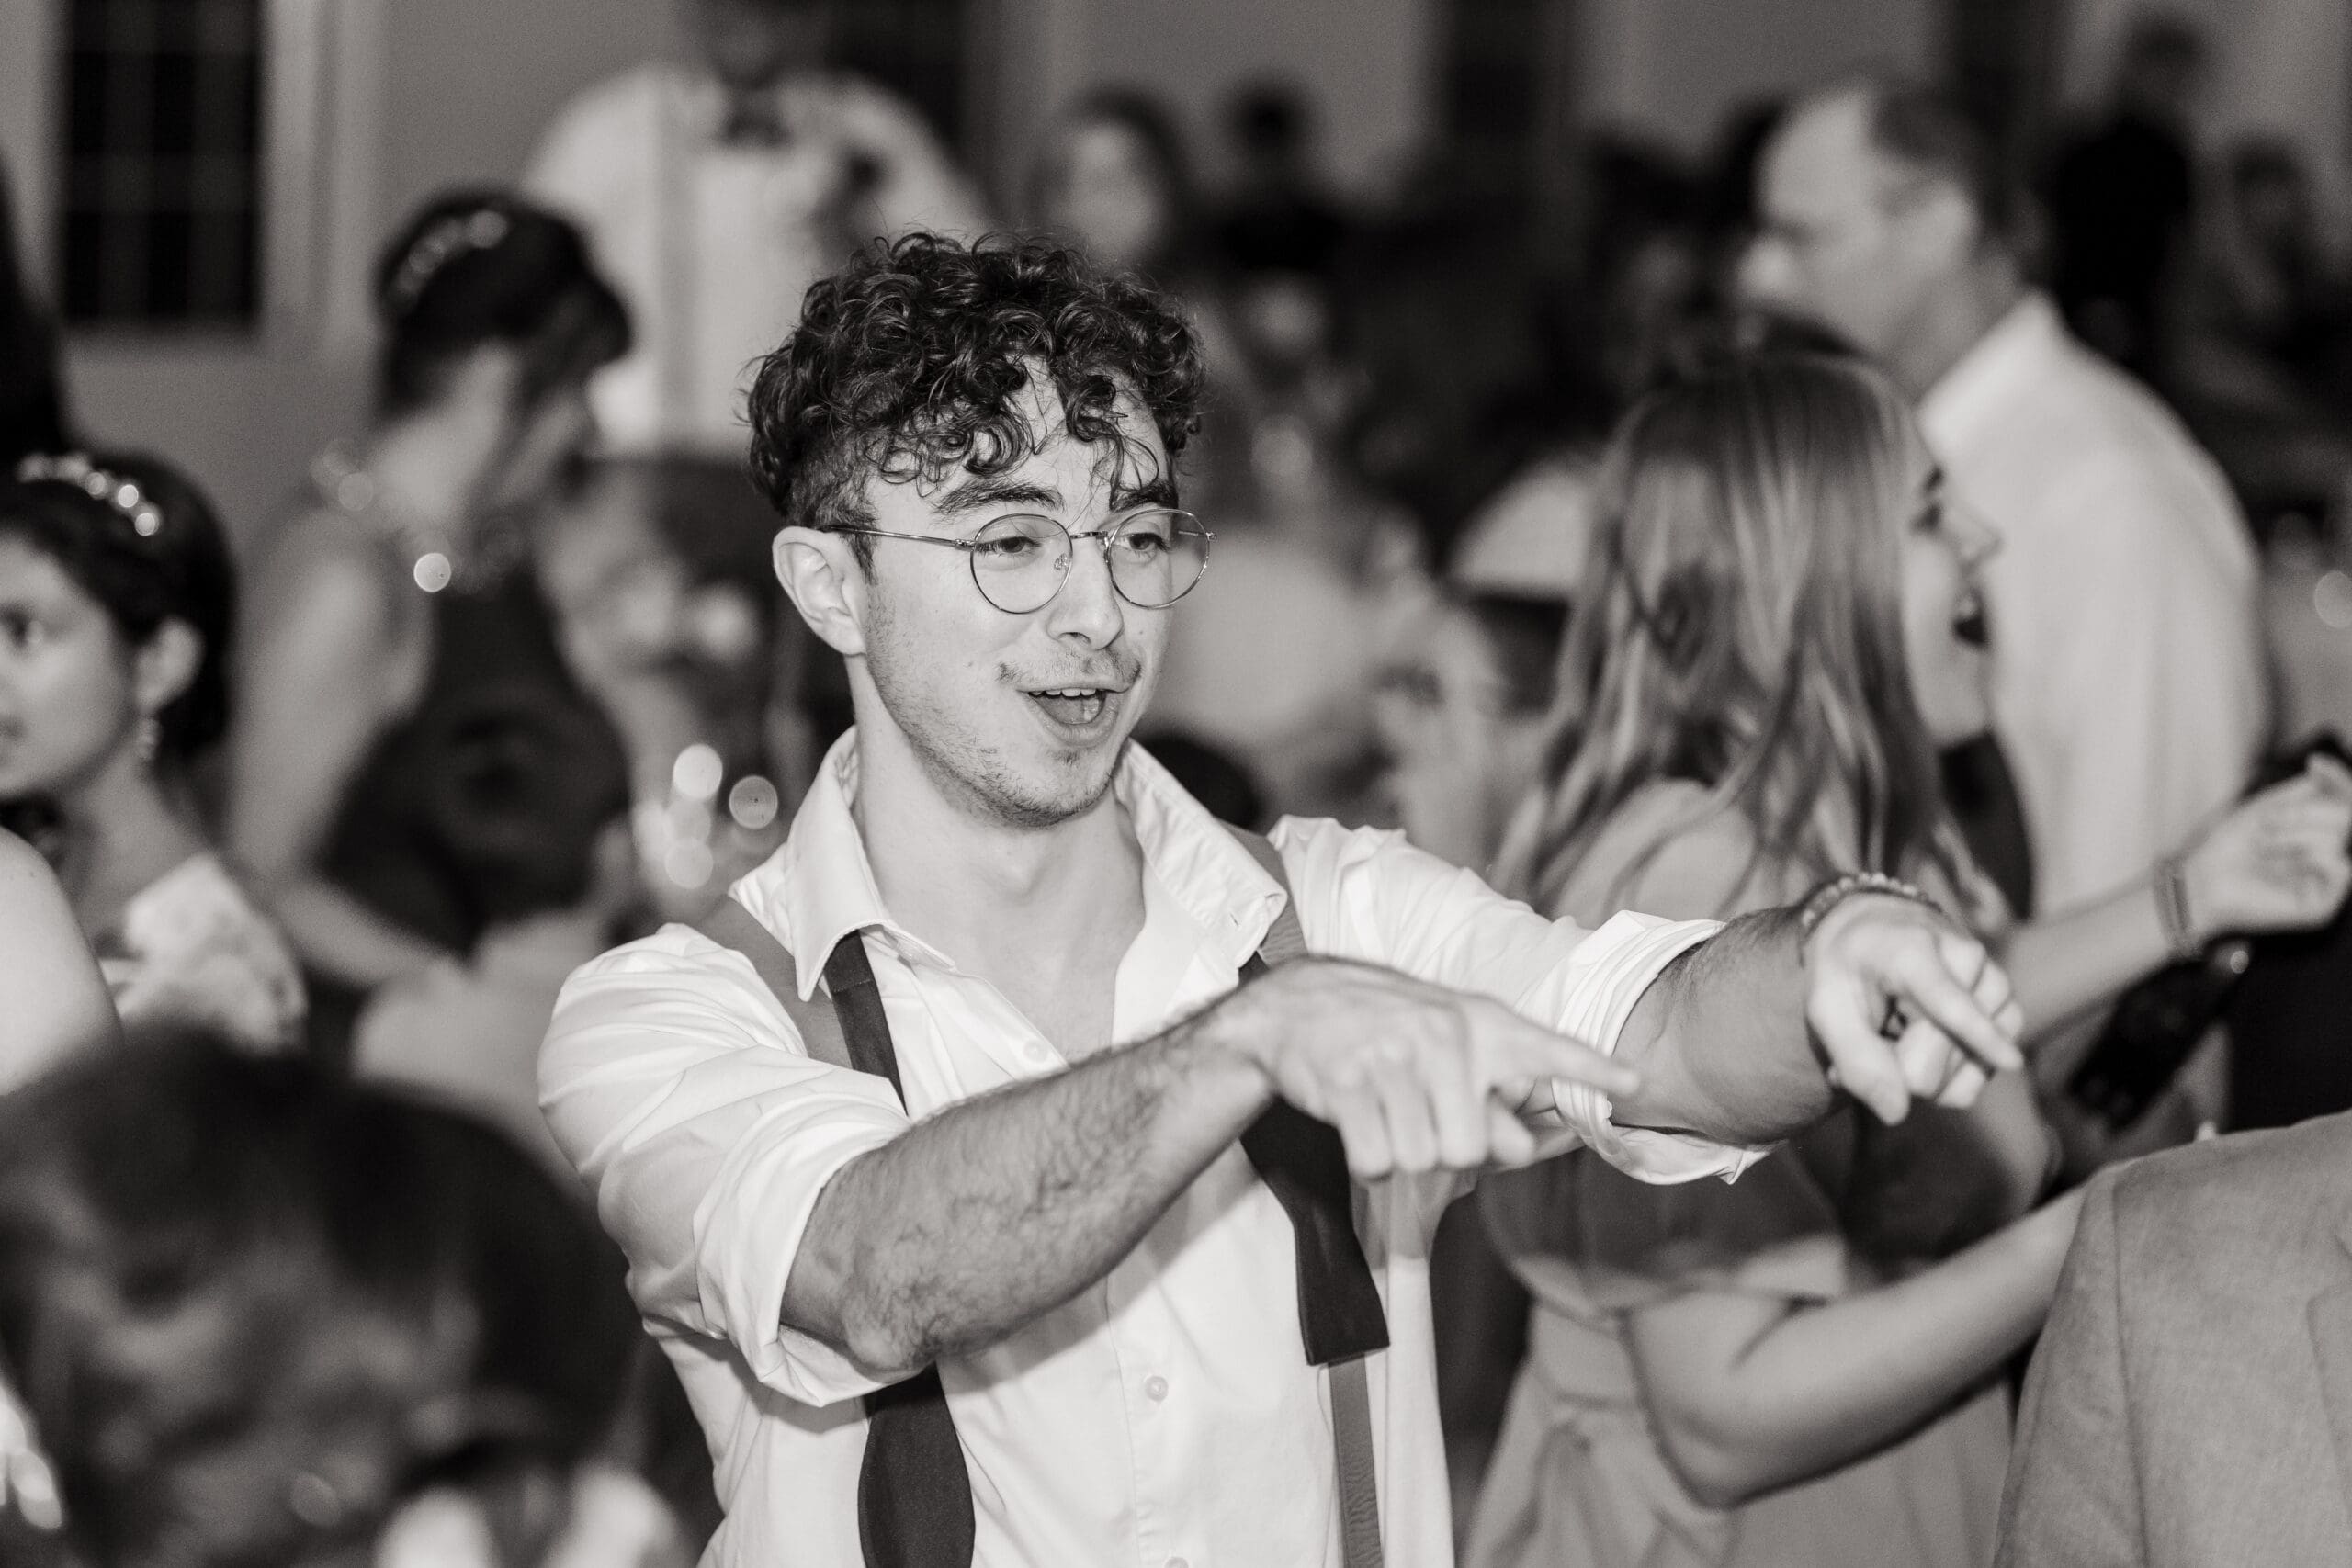 Guests enjoying themselves on the dance floor at the Sterling Event Venue Reception Center in black and white.